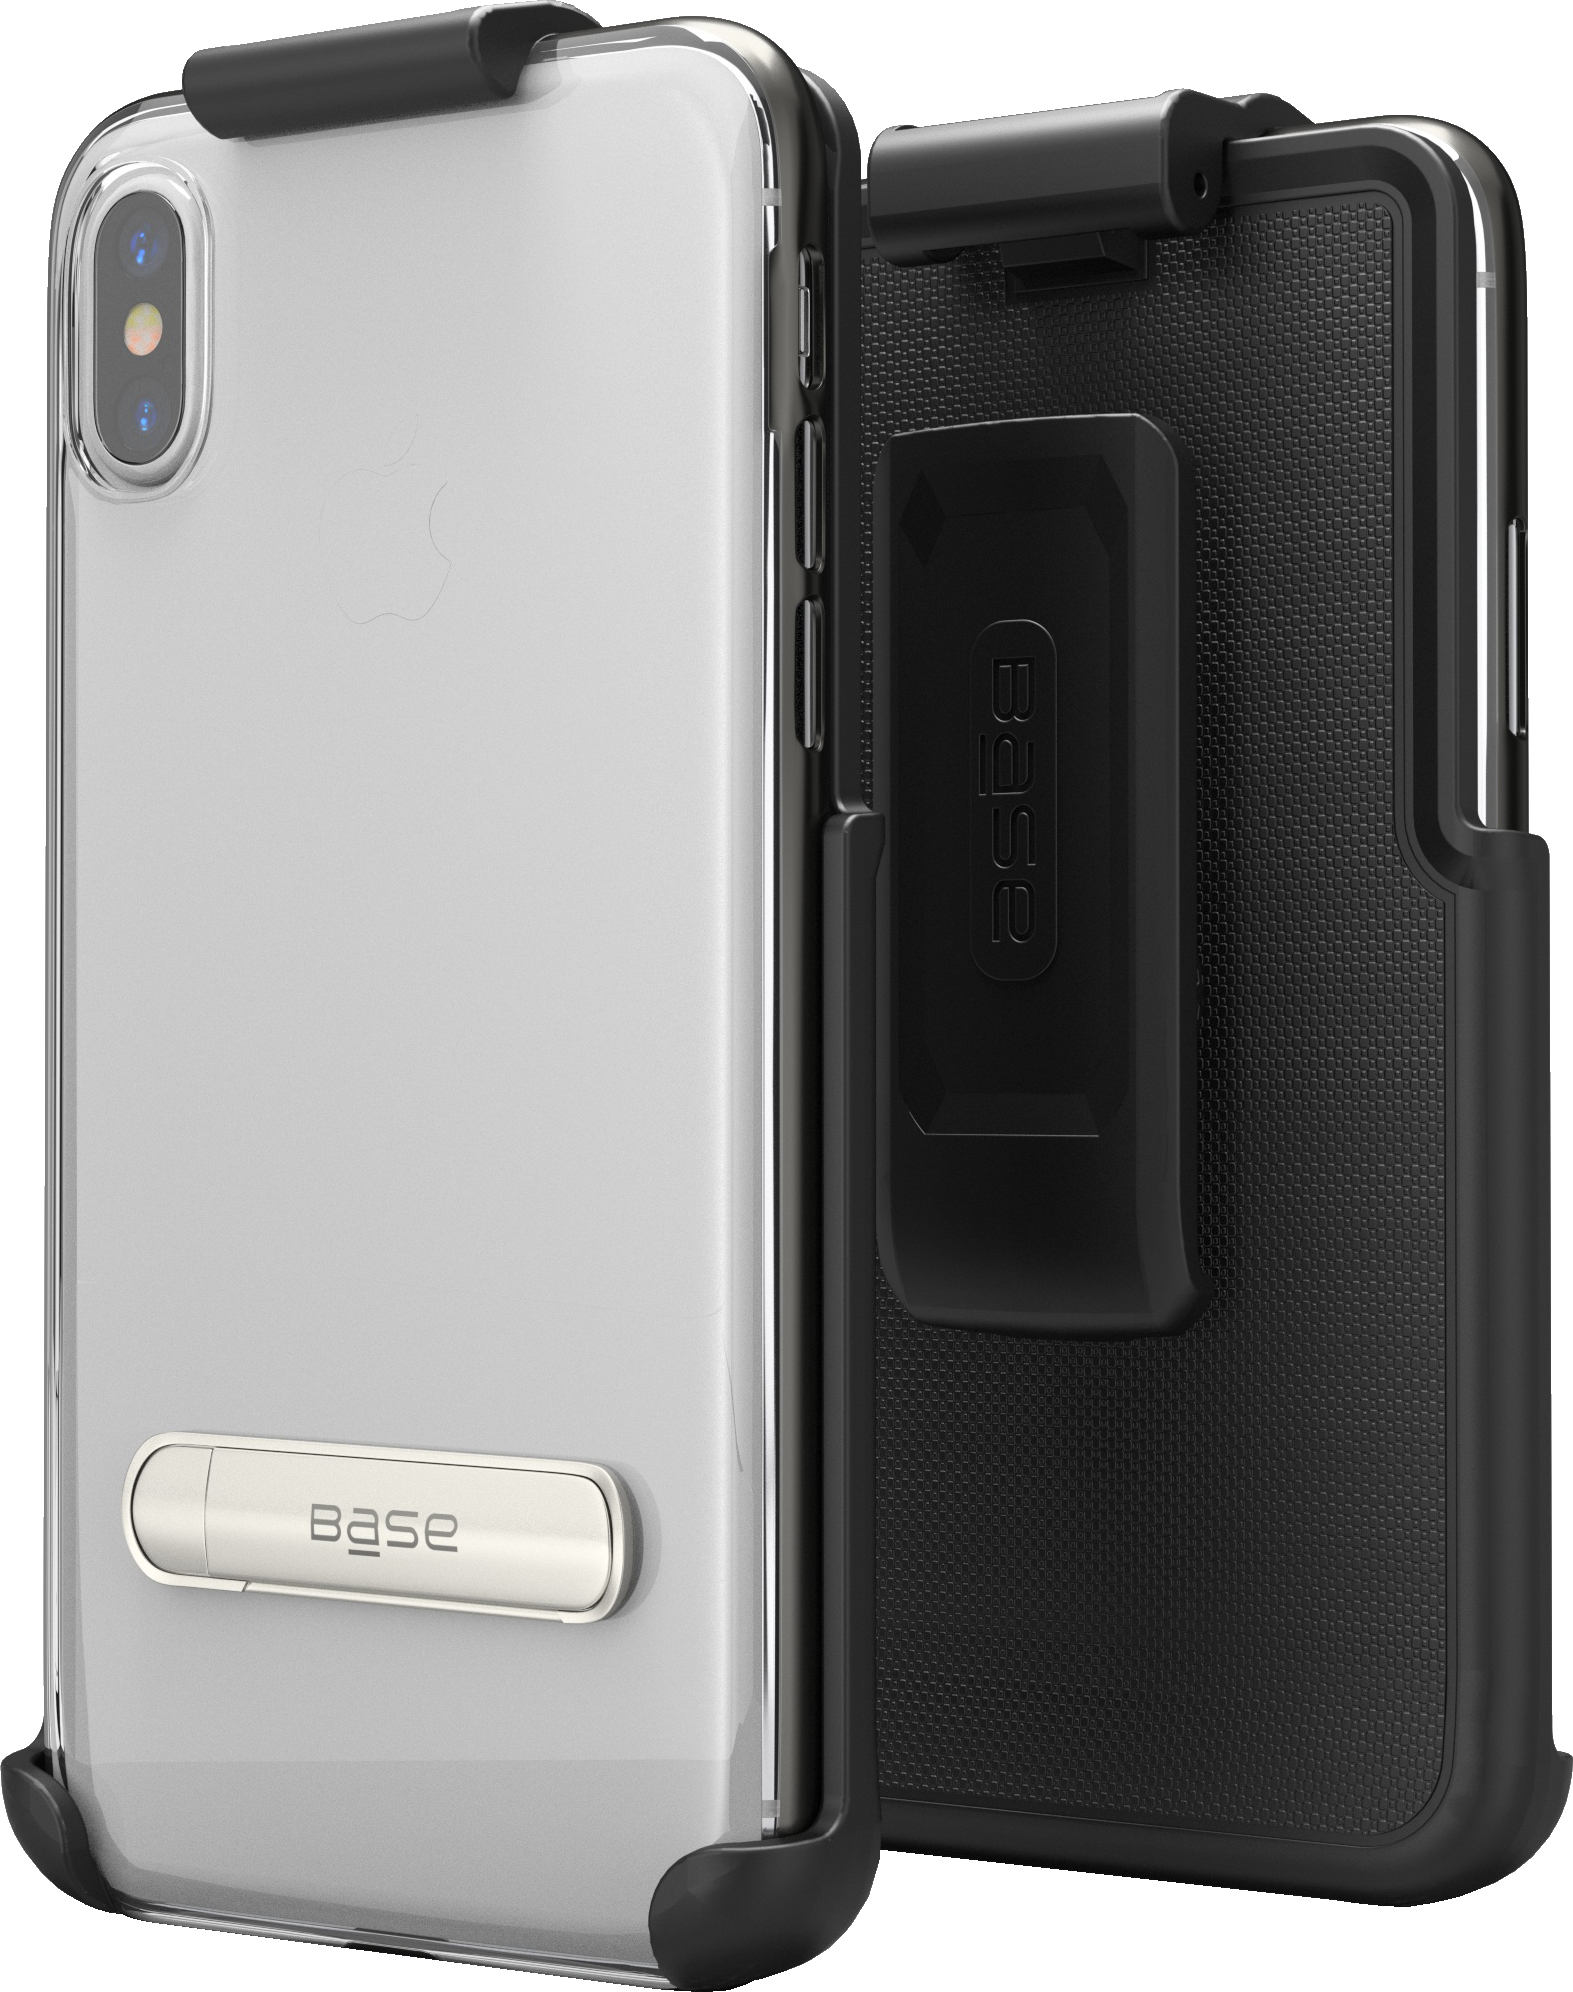 Base DuoHybrid - Reinforced Protective Case w/ Kickstand Holster Combo for iPhone X Max - Black